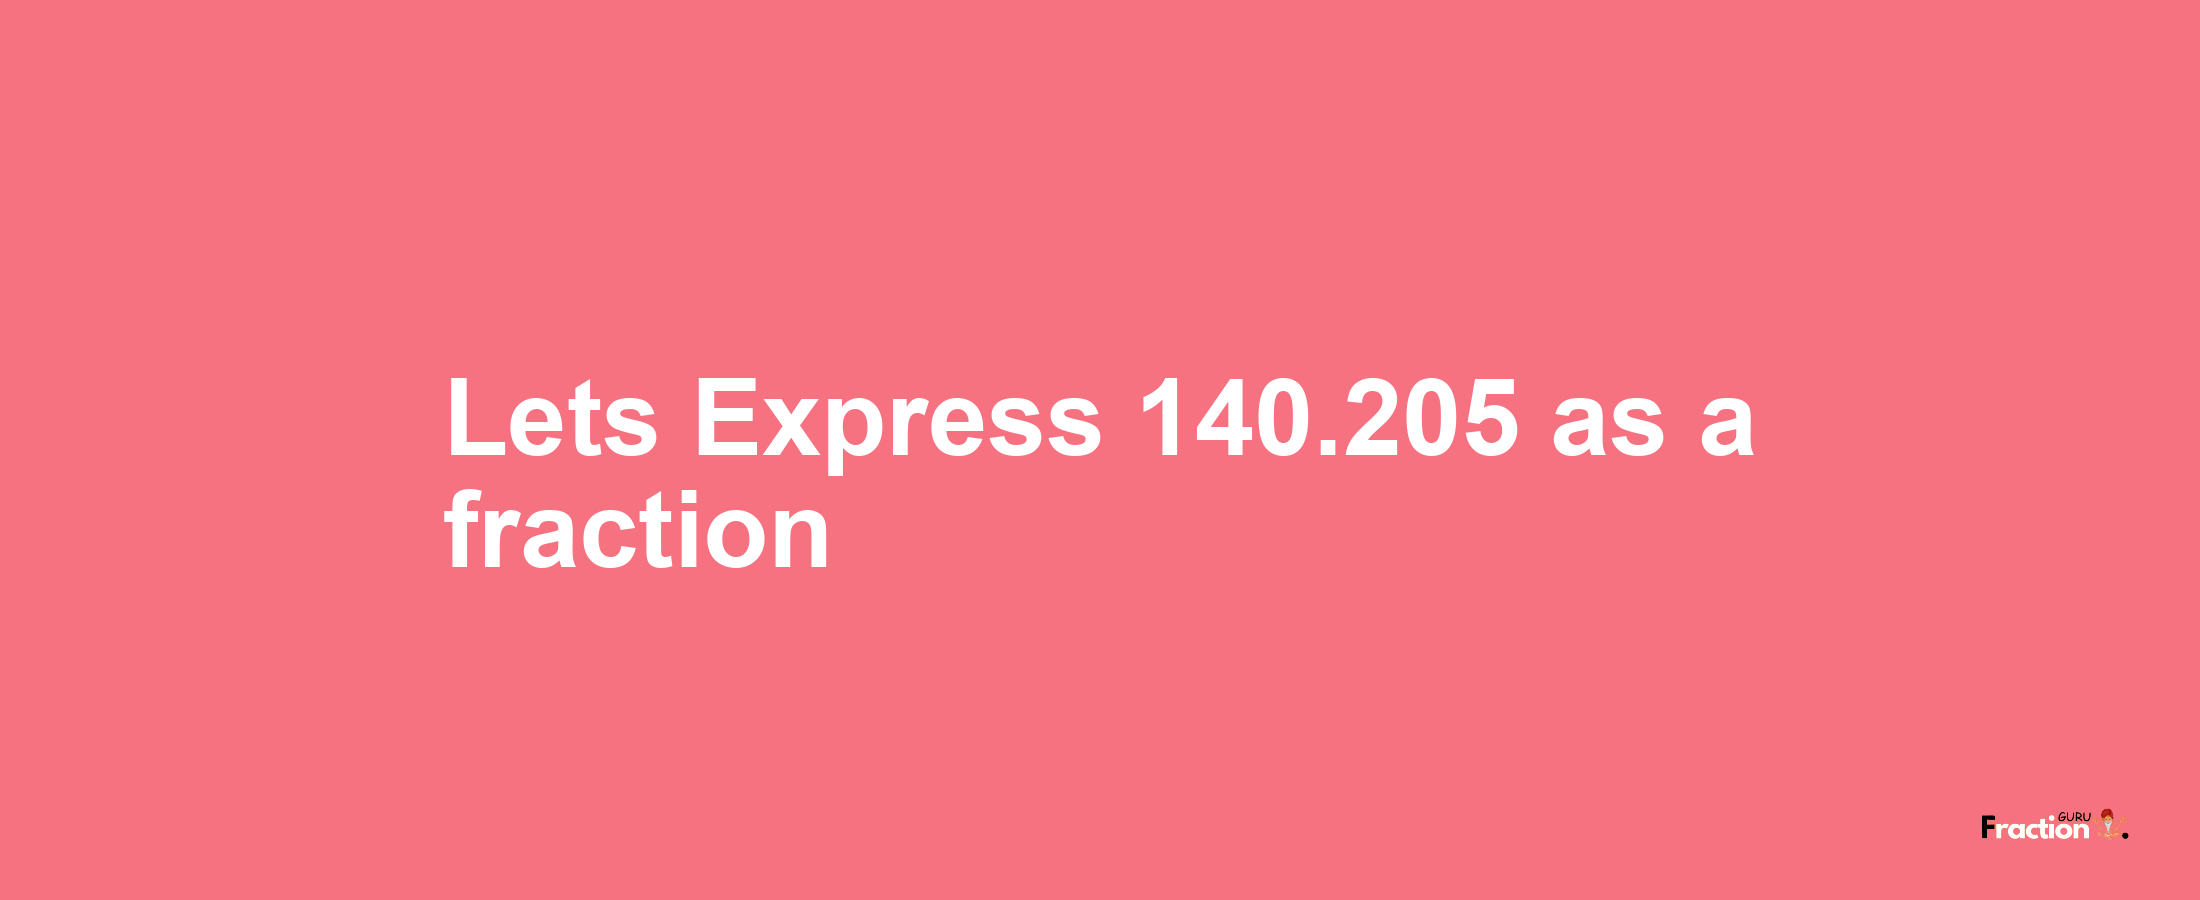 Lets Express 140.205 as afraction